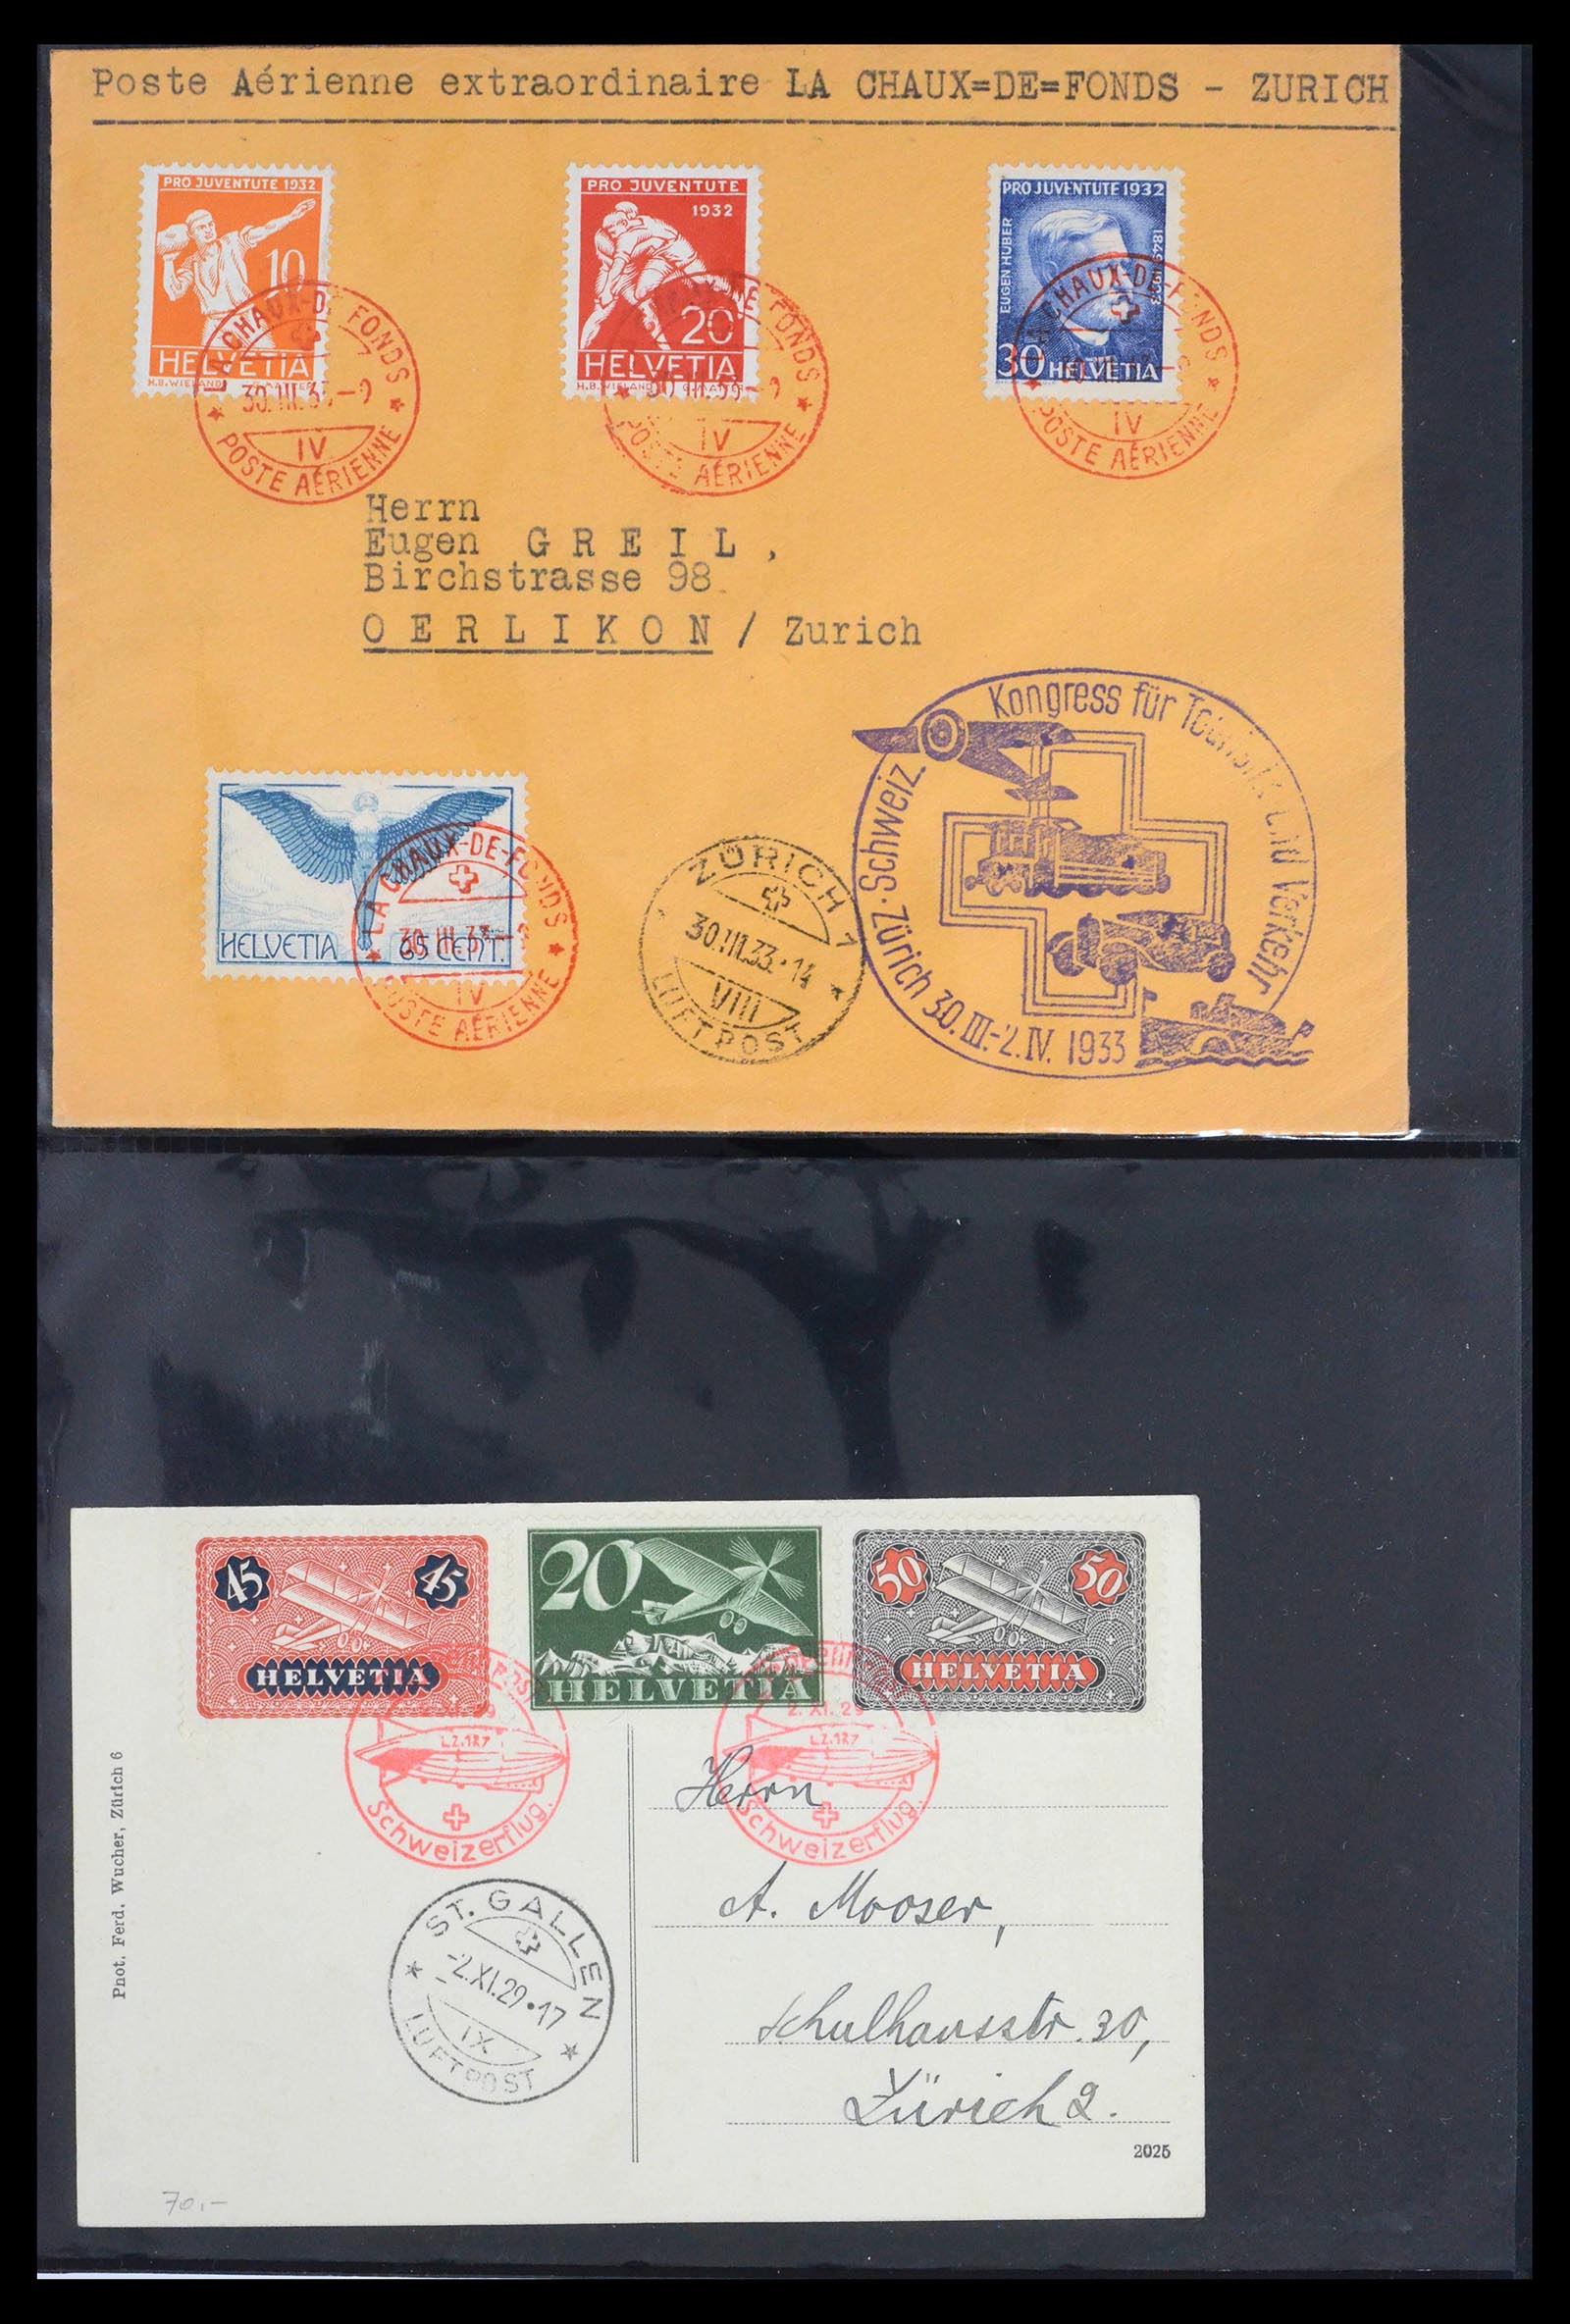 39533 0010 - Stamp collection 39533 Zwitserland airmail covers 1925-1960.